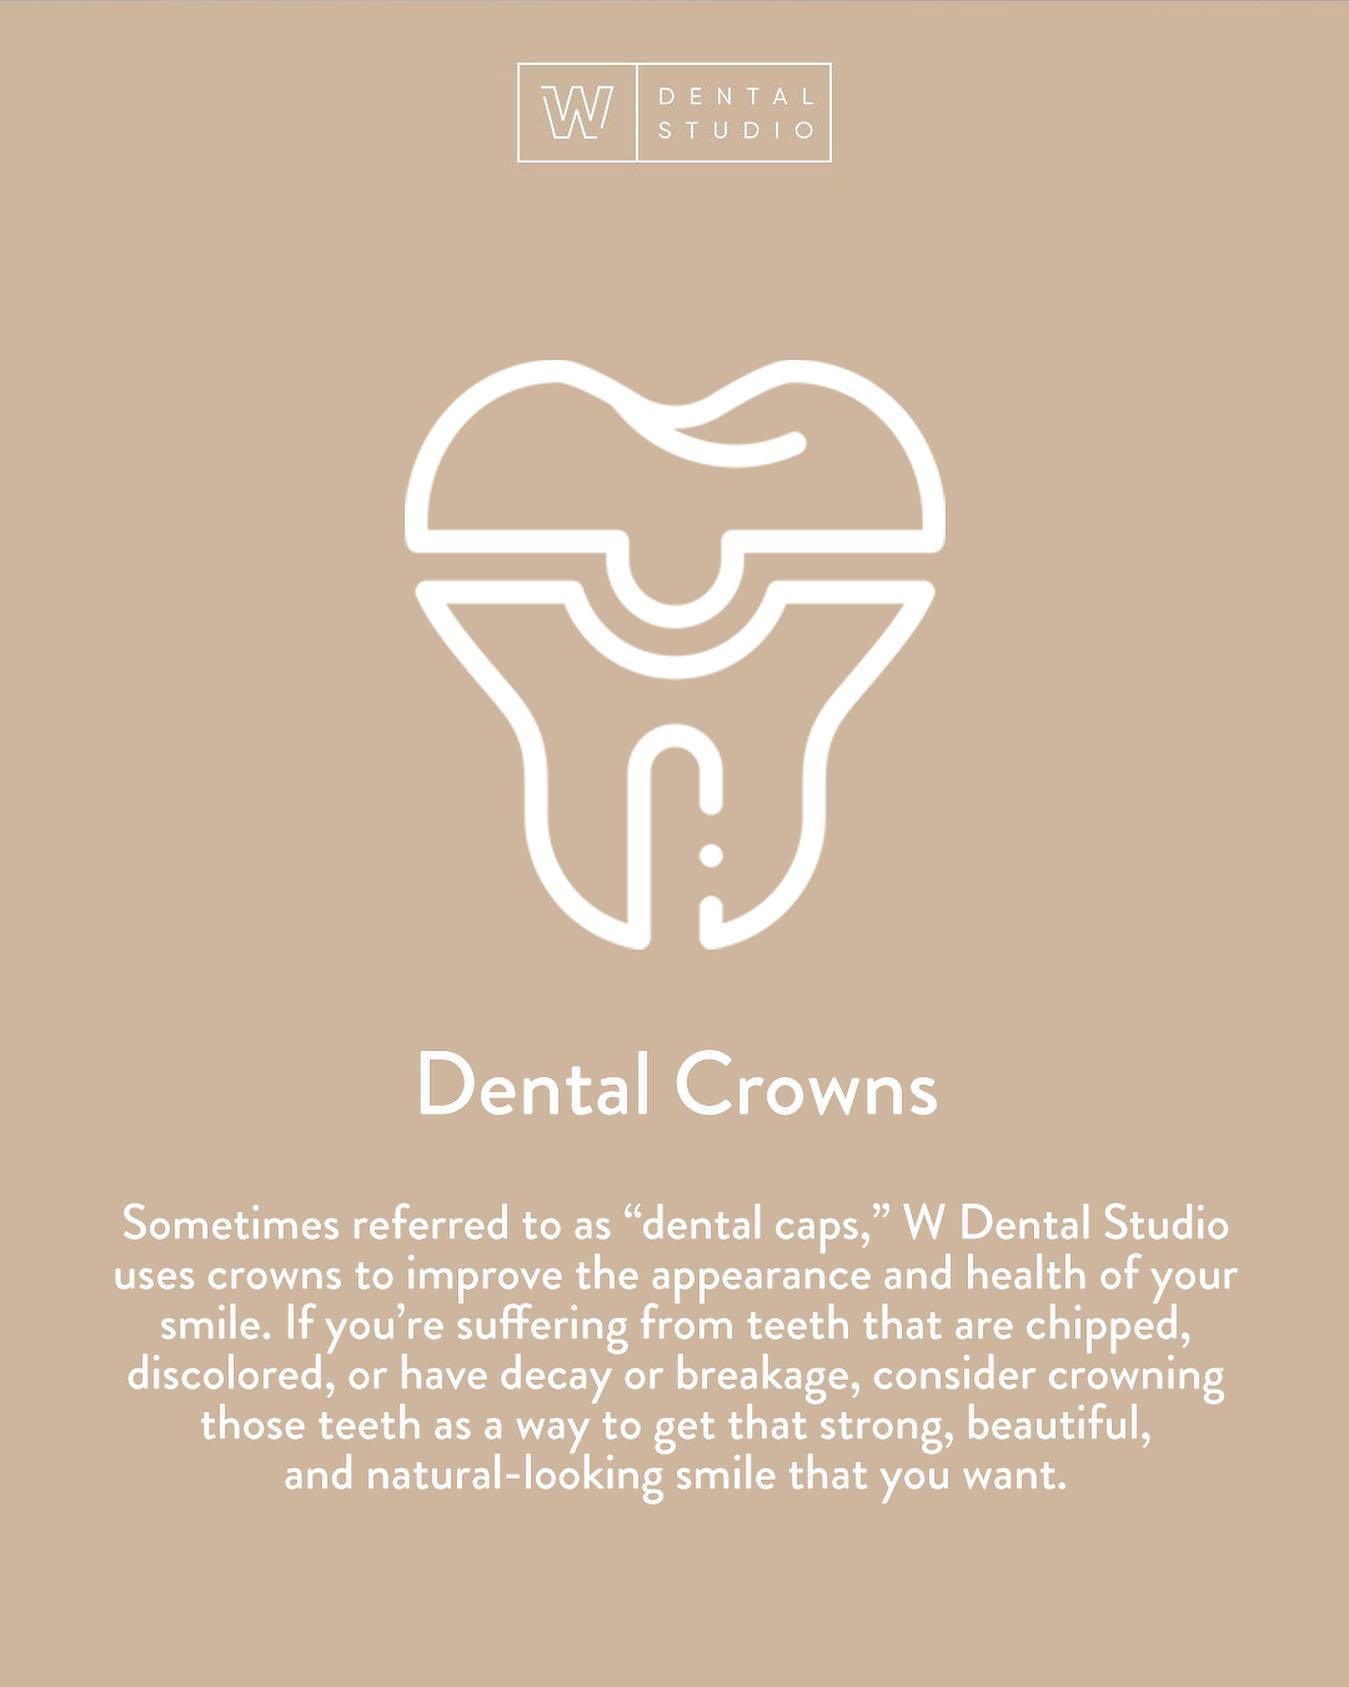 Sometimes referred to as “dental caps,” W Dental Studio uses crowns to improve the appearance and health of your smile.  If you’re suffering from teeth that are chipped, discolored, or have decay or breakage, consider crowning those teeth as a way to get that strong, beautiful, and natural-looking smile that you want. 

Ever wondered what the difference is between a crown and a filling , dental inlay, or dental onlay?  Crowns cover the entire tooth from the gum line up—so in essence, a crown becomes your new tooth surface because it completely envelopes it. On the other hand, fillings, inlays, and onlays only cover or fill a portion of the tooth, so your natural tooth surface still shows alongside .  One similarity that crowns and fillings do have, however, is that many times they can be created from similar materials like porcelain, ceramic, or even gold alloy. Not sure which material makes the most sense for your crown? Dr. Al Khalili or Dr. Daftary can help you choose the best option for you.
￼
 📞 613-564-3300
 📍 270 Richmond Rd, Ottawa, ON
 💻 https://www.wdentalstudio.com
 📧 info@wdentalstudio.com